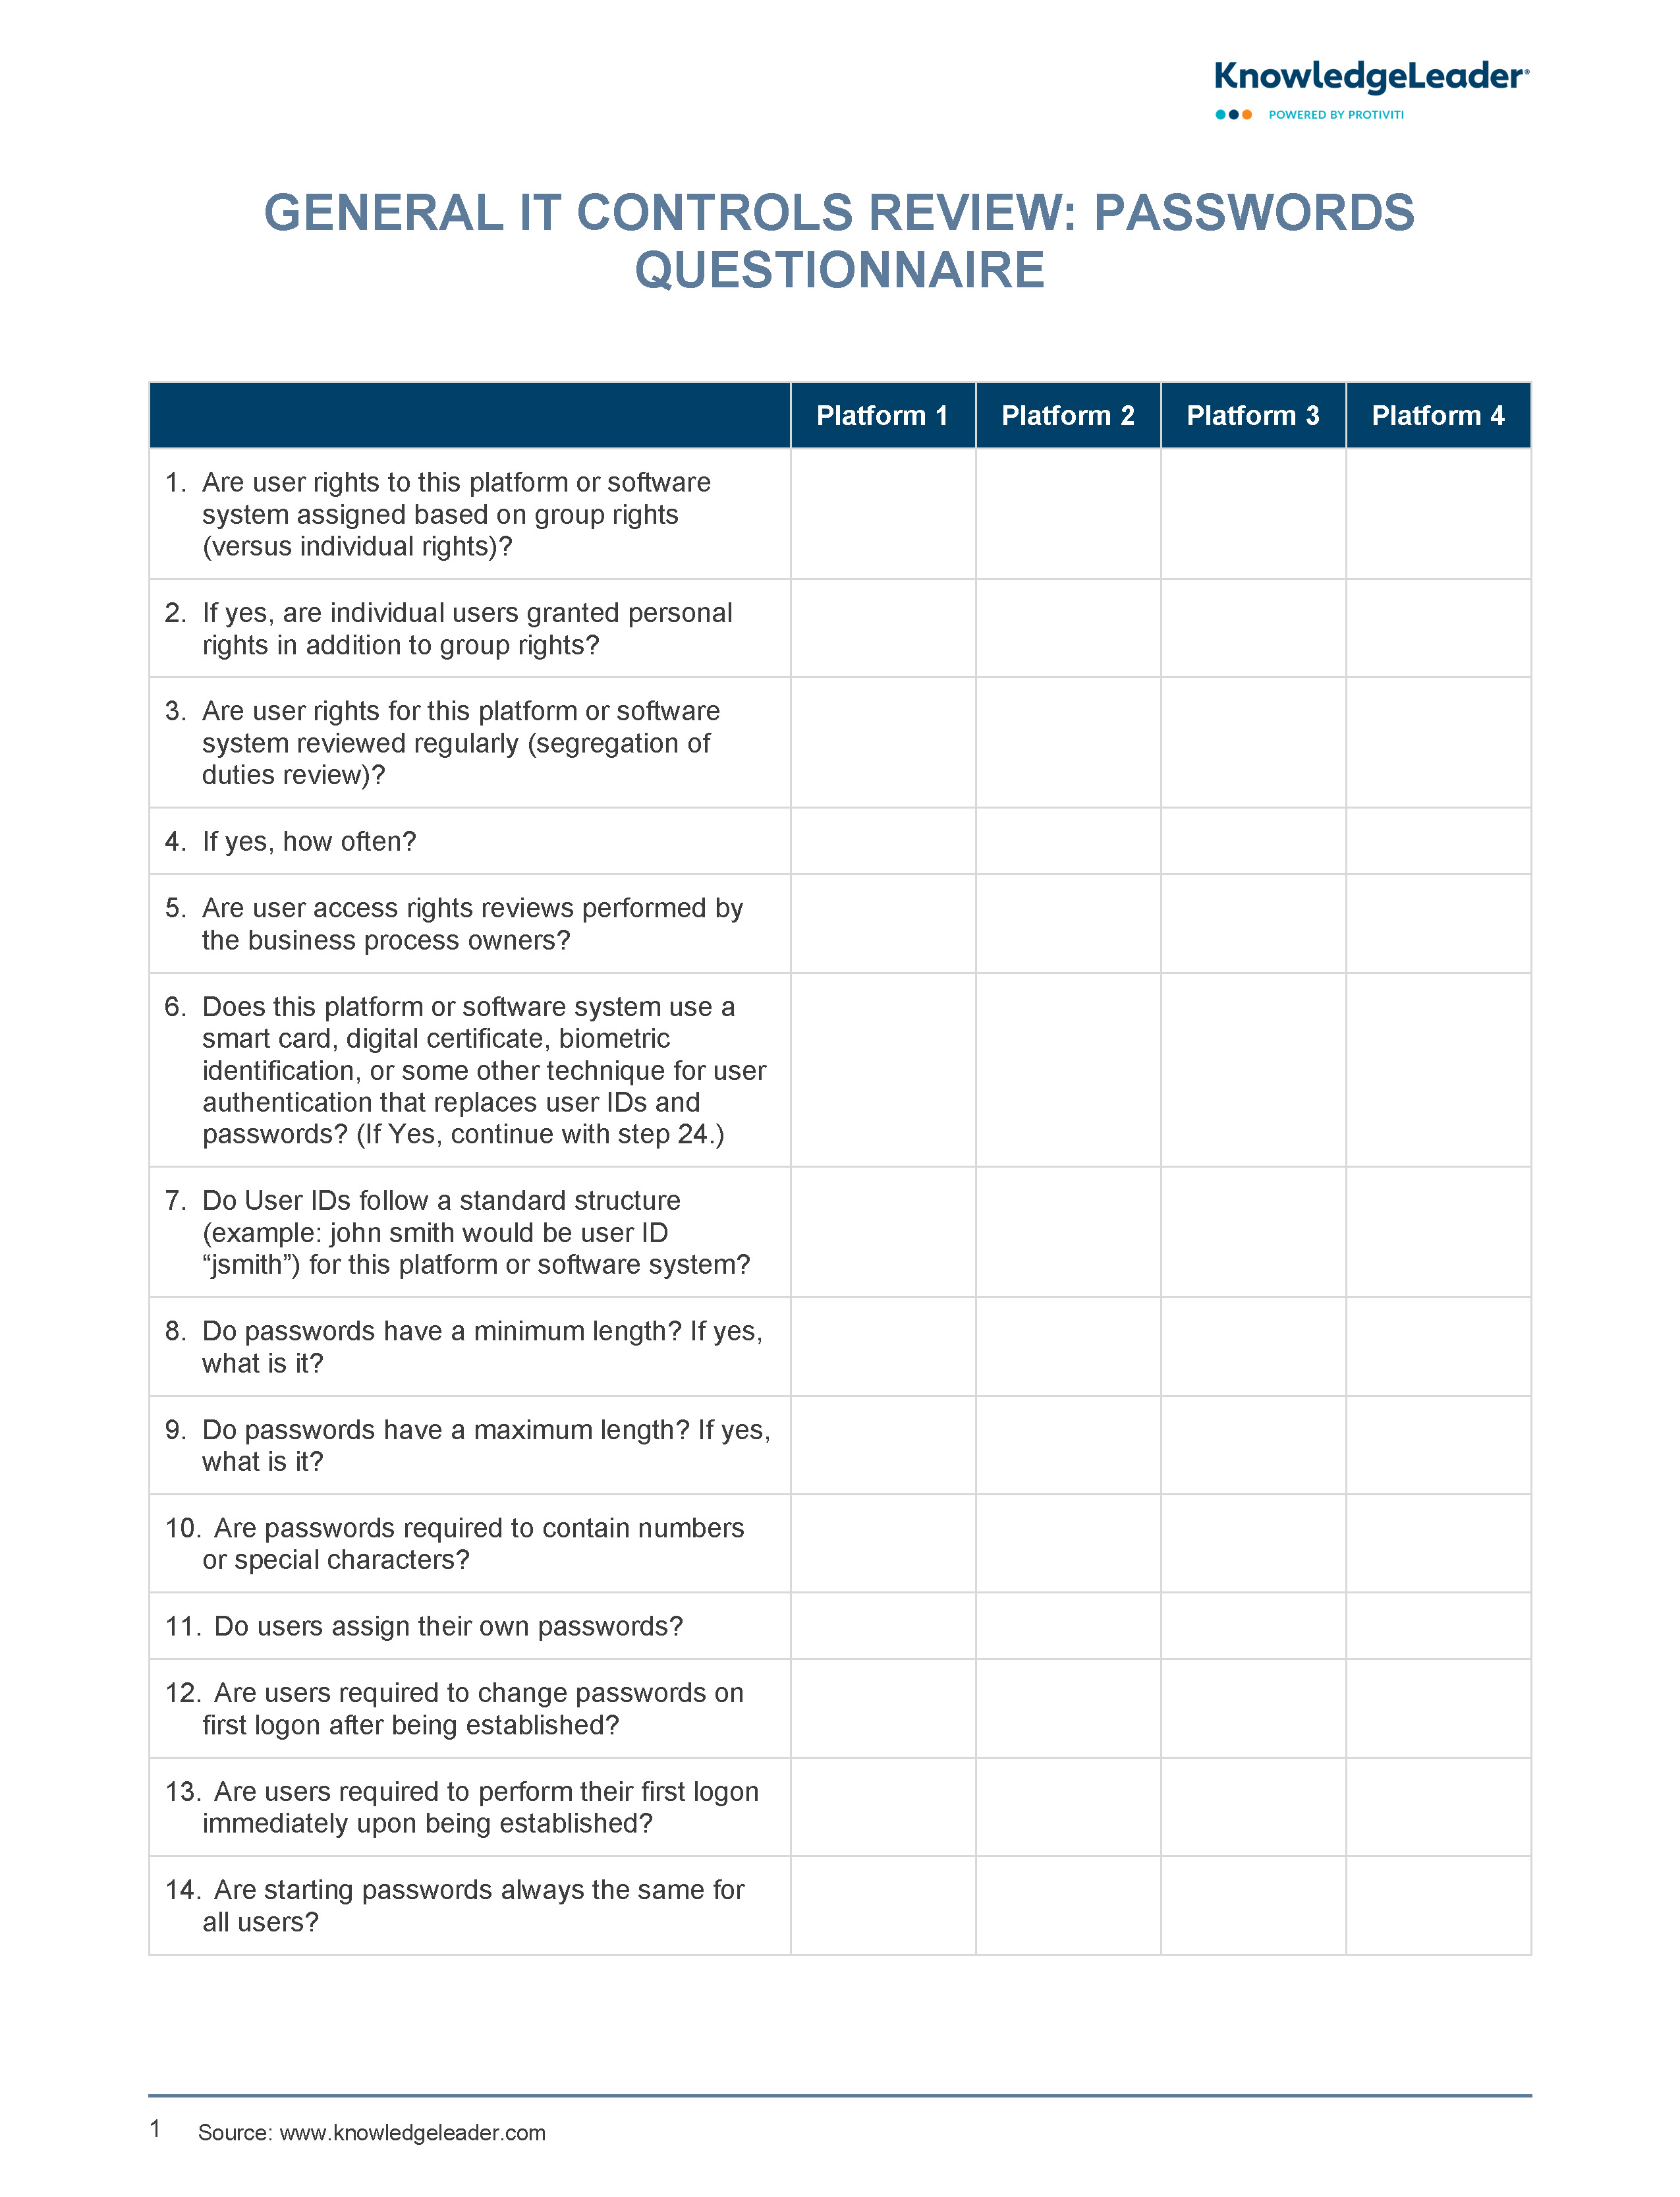 Screenshot of the first page of General IT Controls Review Password Questionnaire